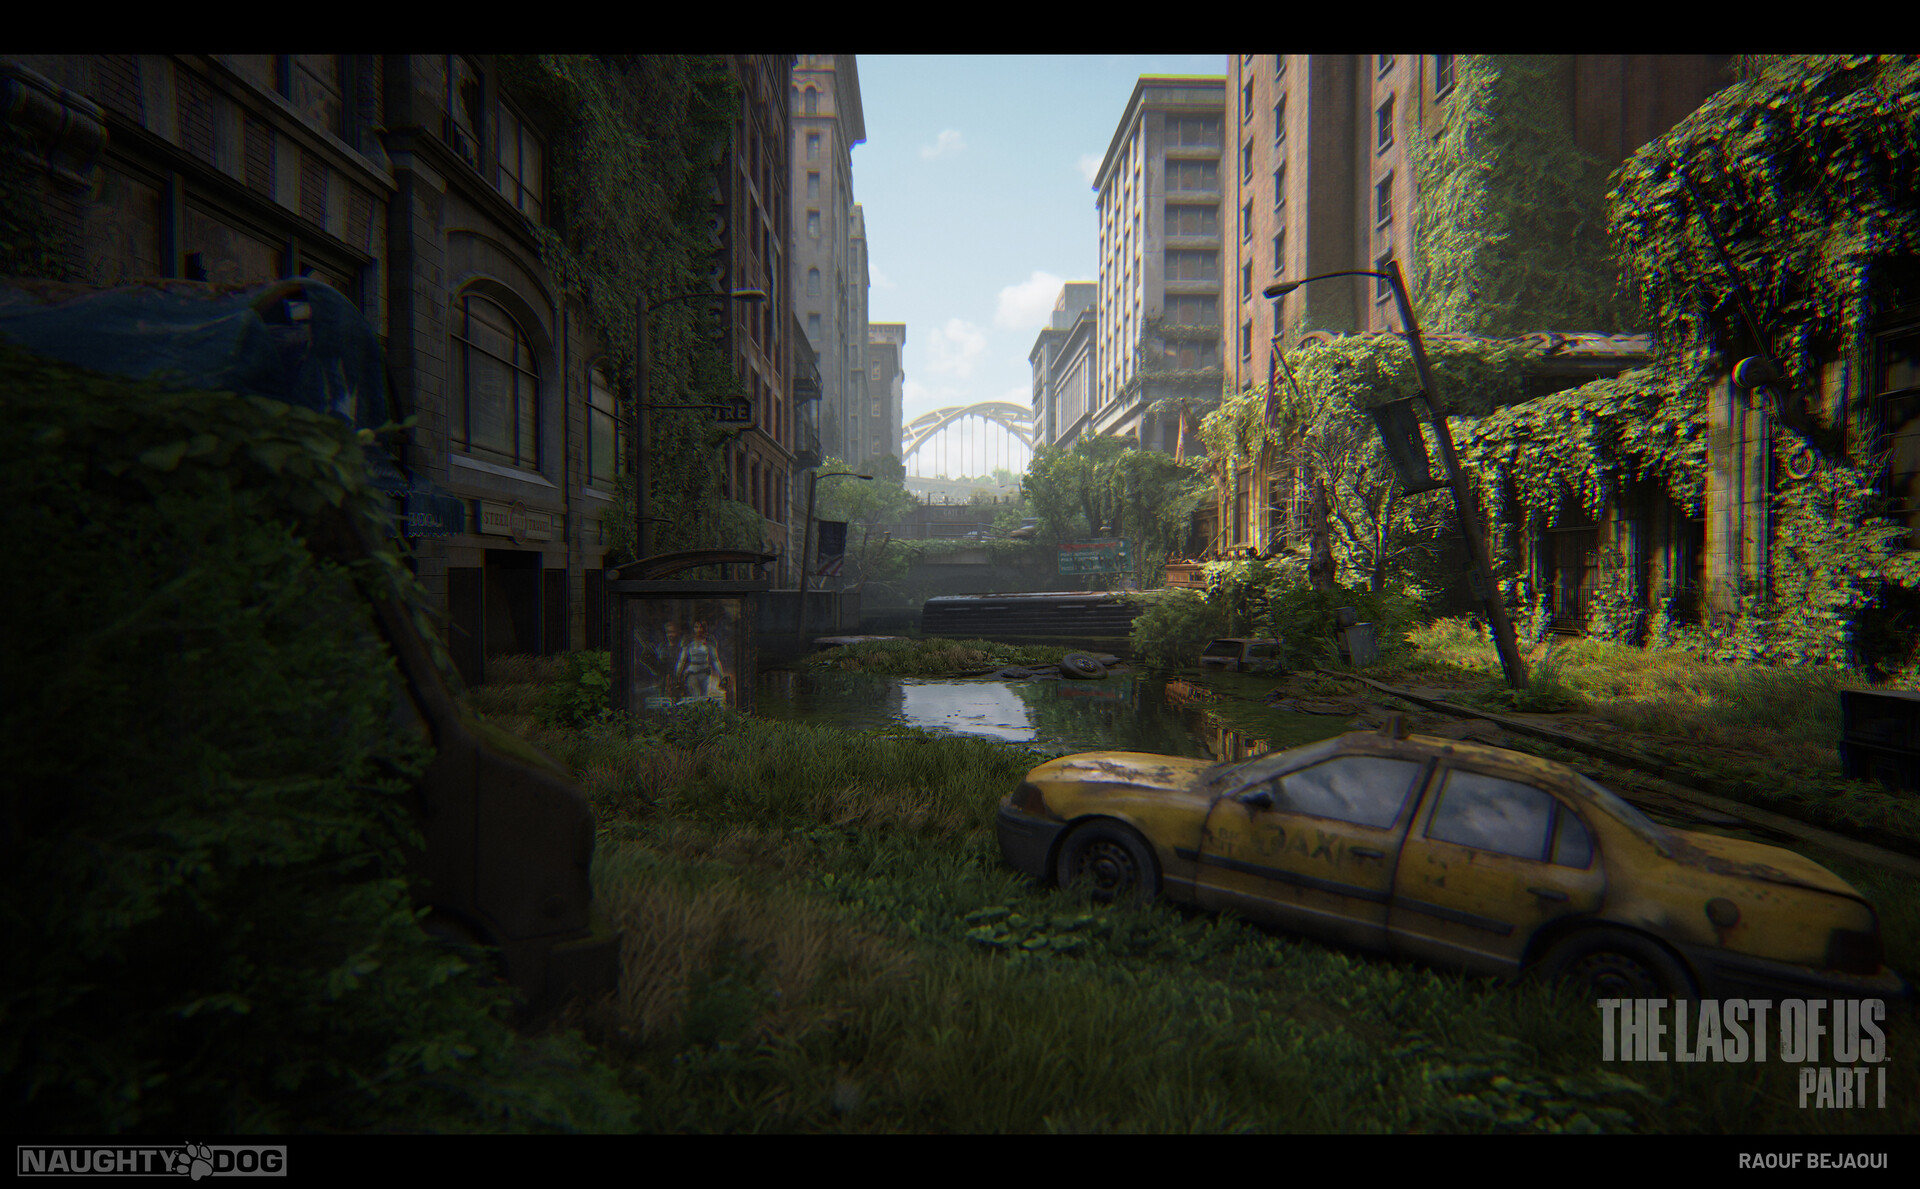 ArtStation - The Last of Us Part I - Tommy